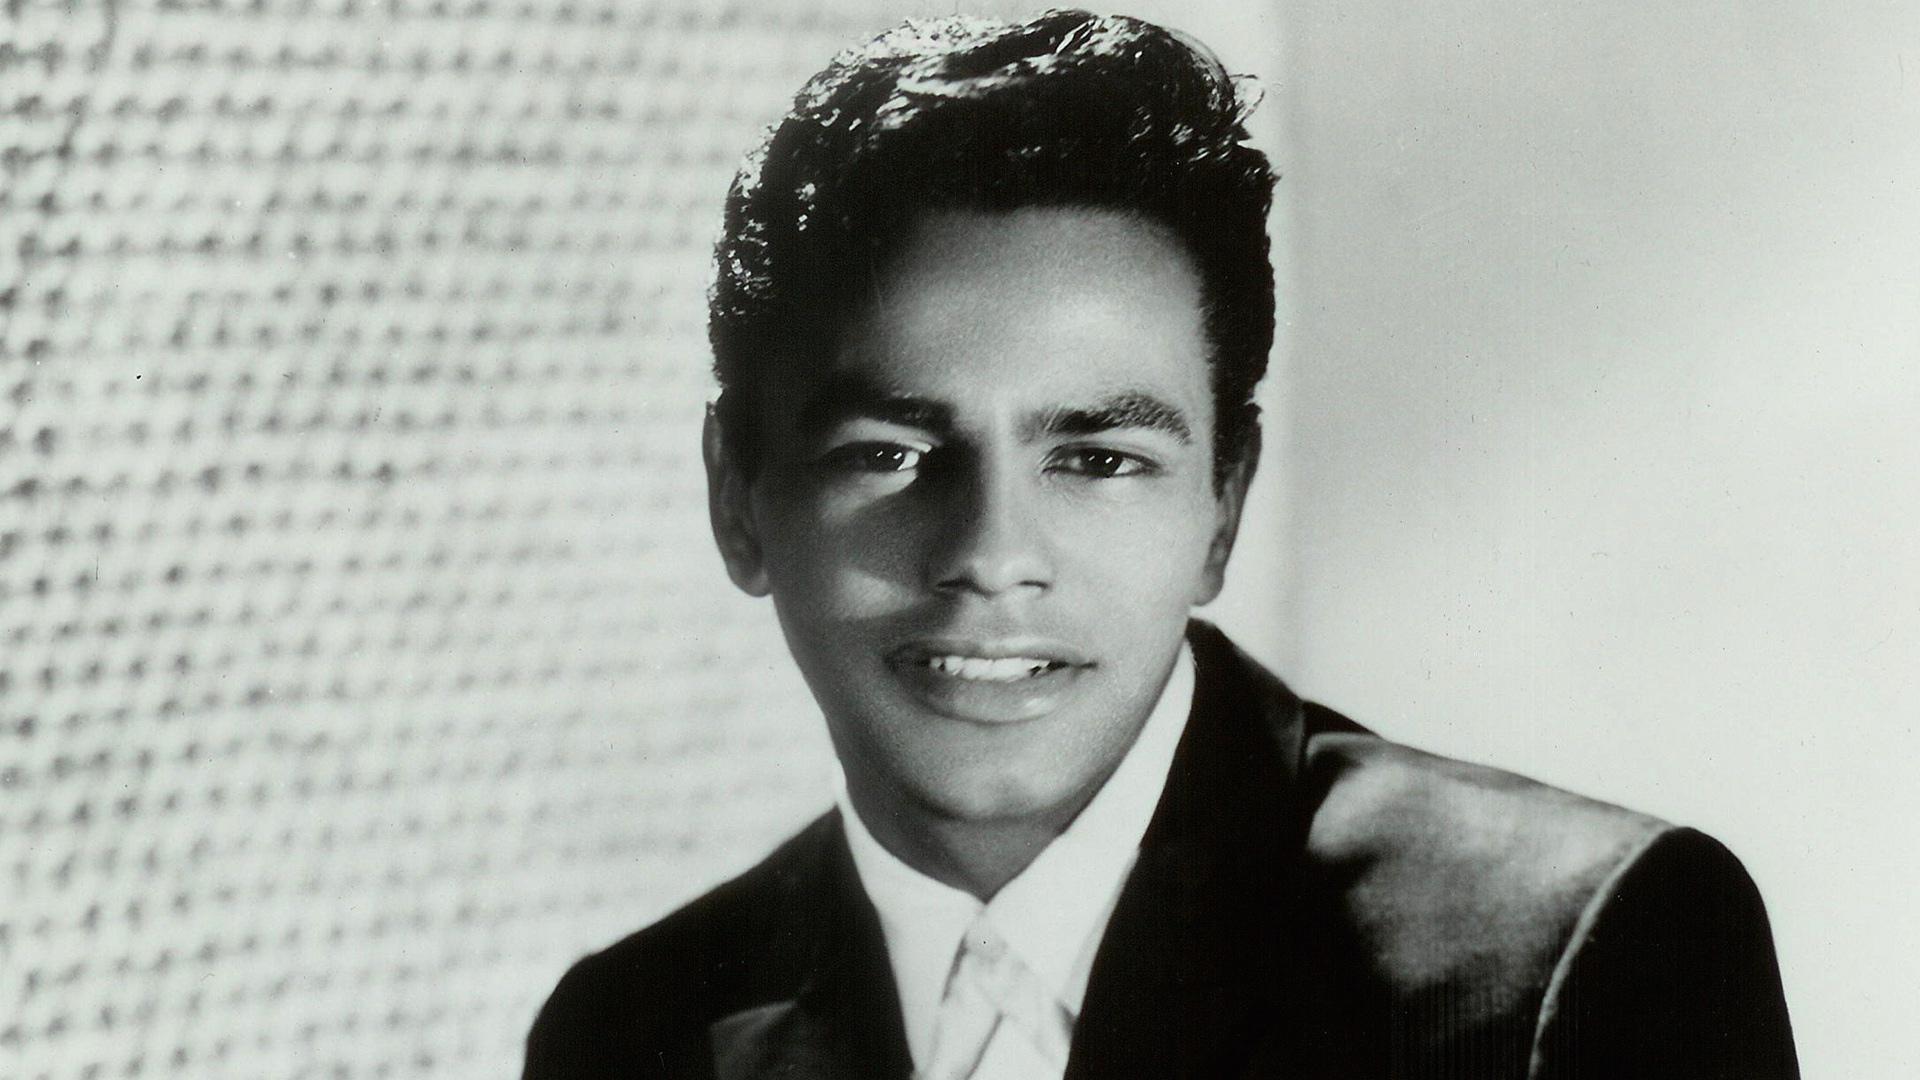 HAPPY BIRTHDAY... JOHNNY MATHIS! \"TOO MUCH, TOO LITTLE, TO LATE\"
ft Deniece Williams. 